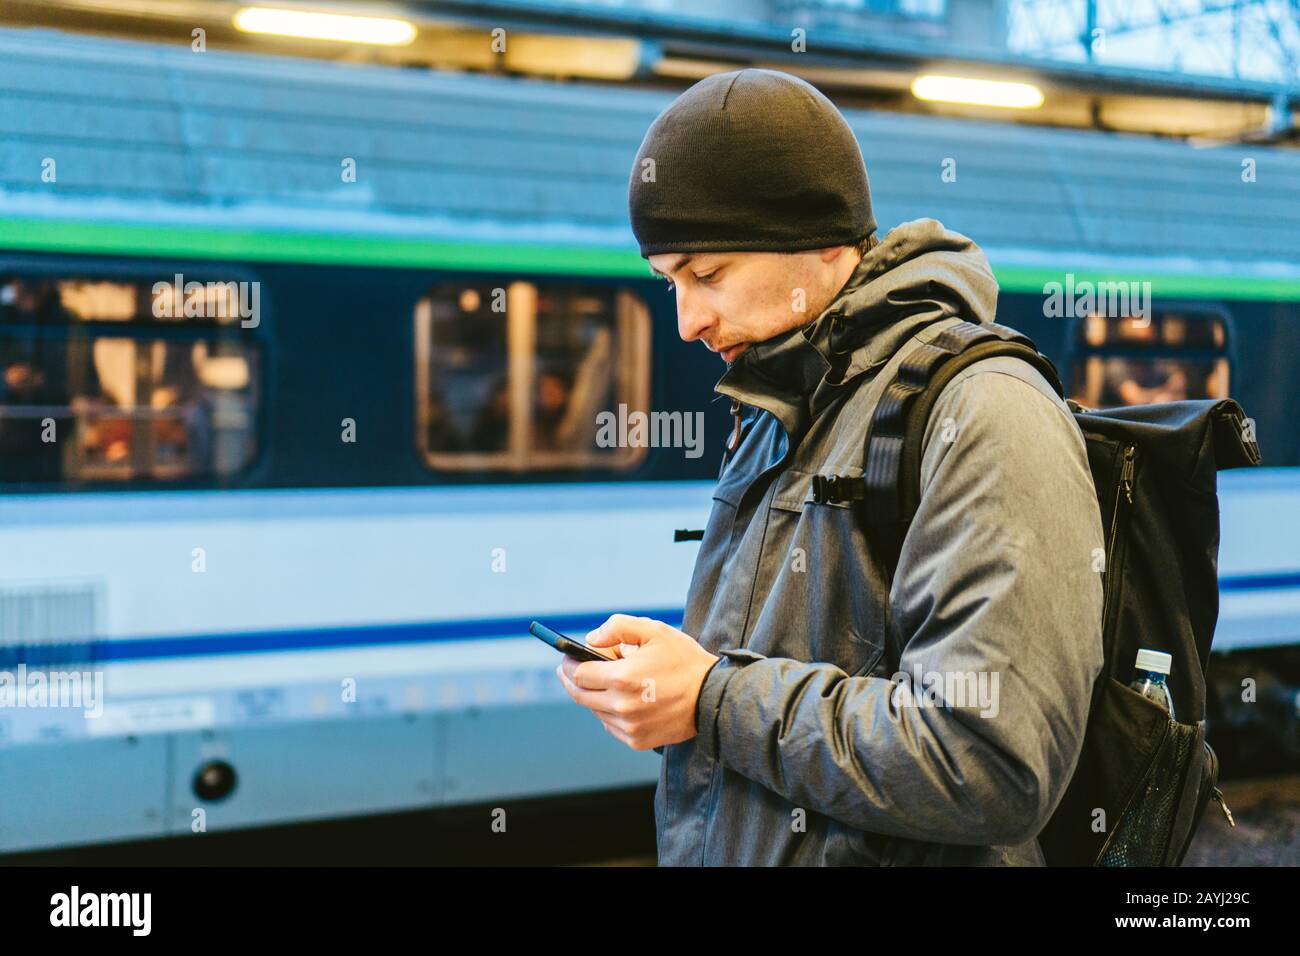 Sopot Railway station. traveler waiting for transportation. Travel concept. Man at the train station. Portrait Caucasian Male In Railway Train Station Stock Photo